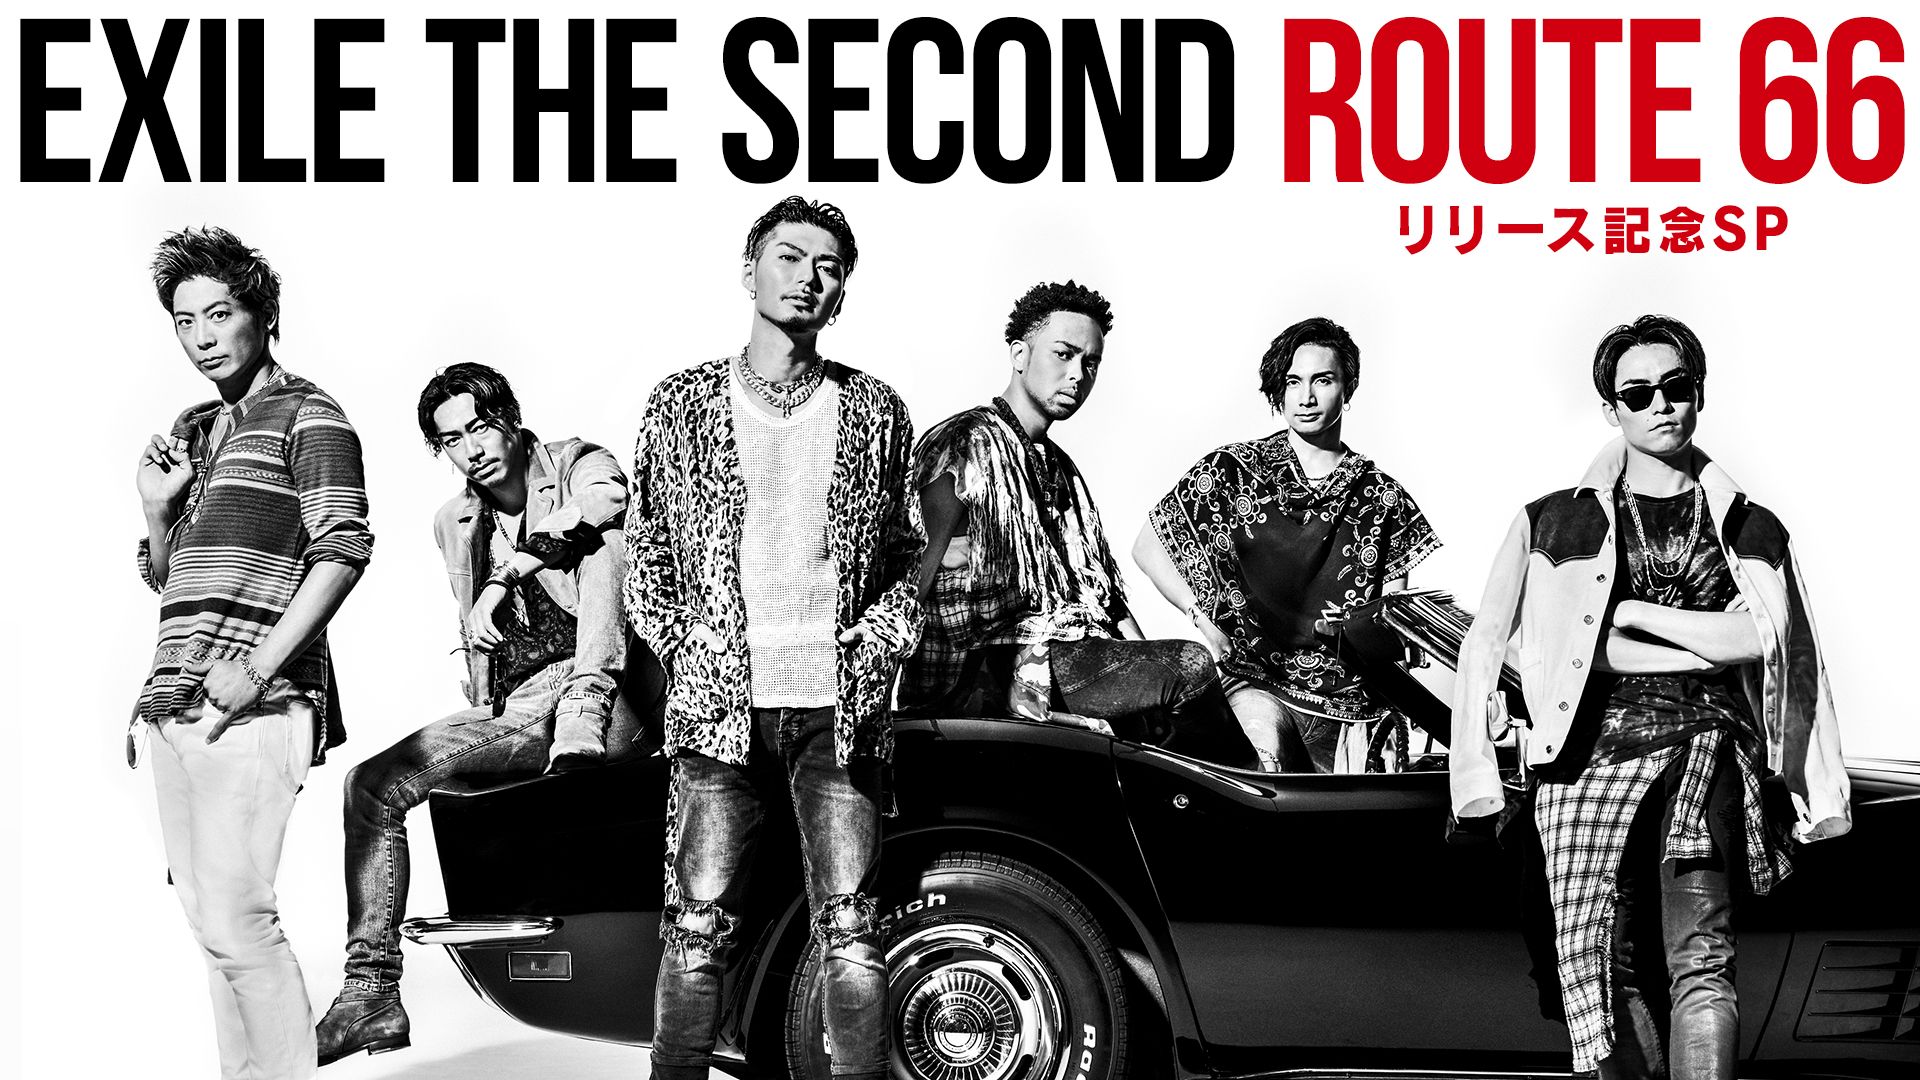 EXILE THE SECOND「Route 66」リリース記念SP | 新しい未来のテレビ | ABEMA